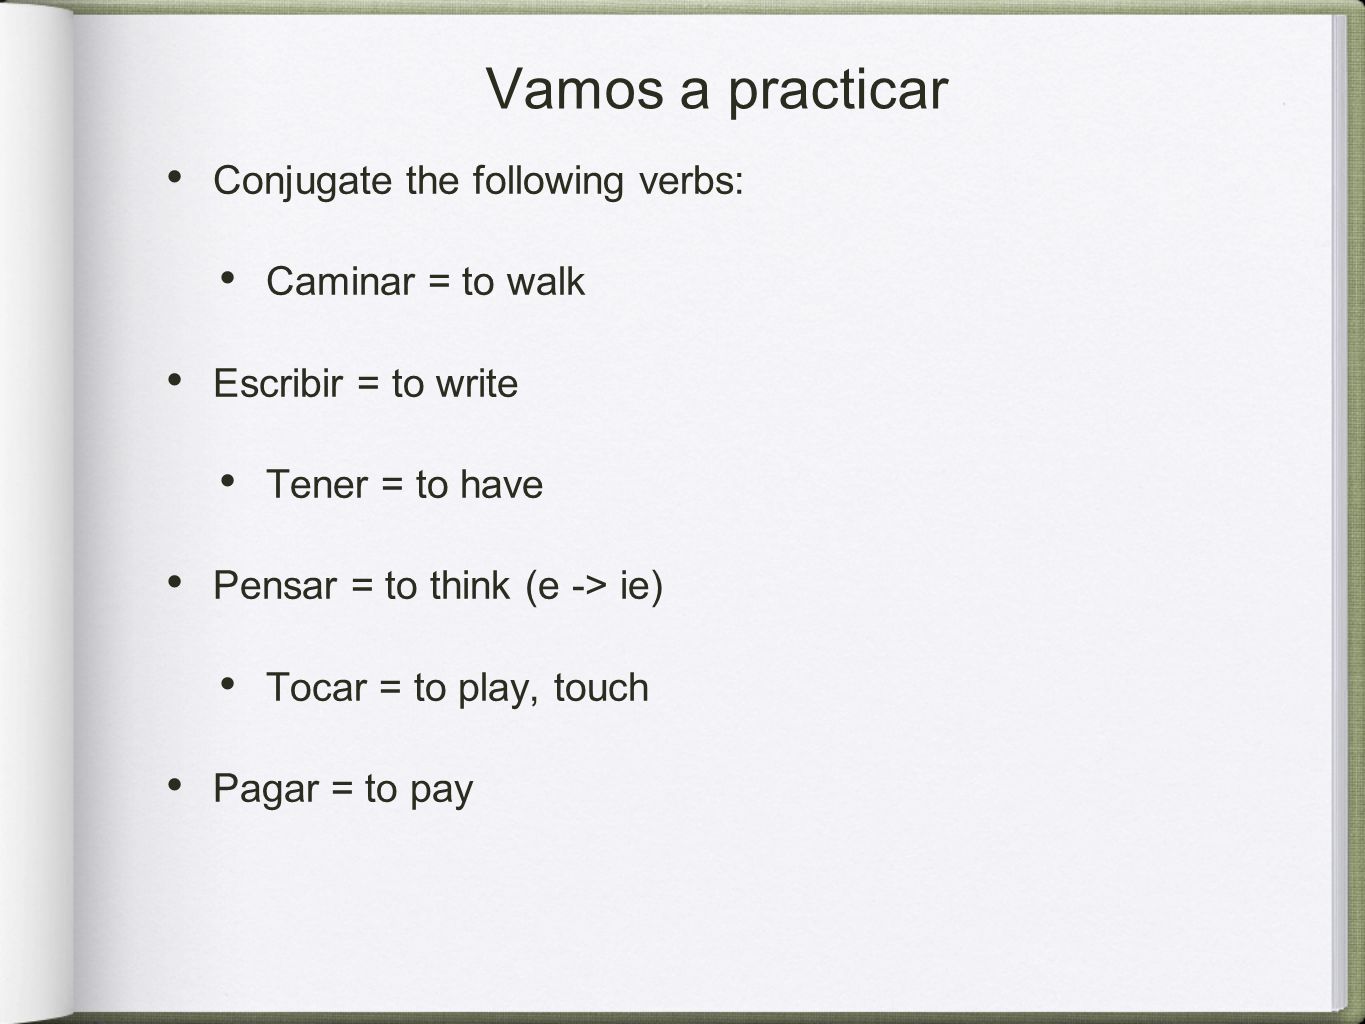 Vamos a practicar Conjugate the following verbs: Caminar = to walk Escribir = to write Tener = to have Pensar = to think (e -> ie) Tocar = to play, touch Pagar = to pay